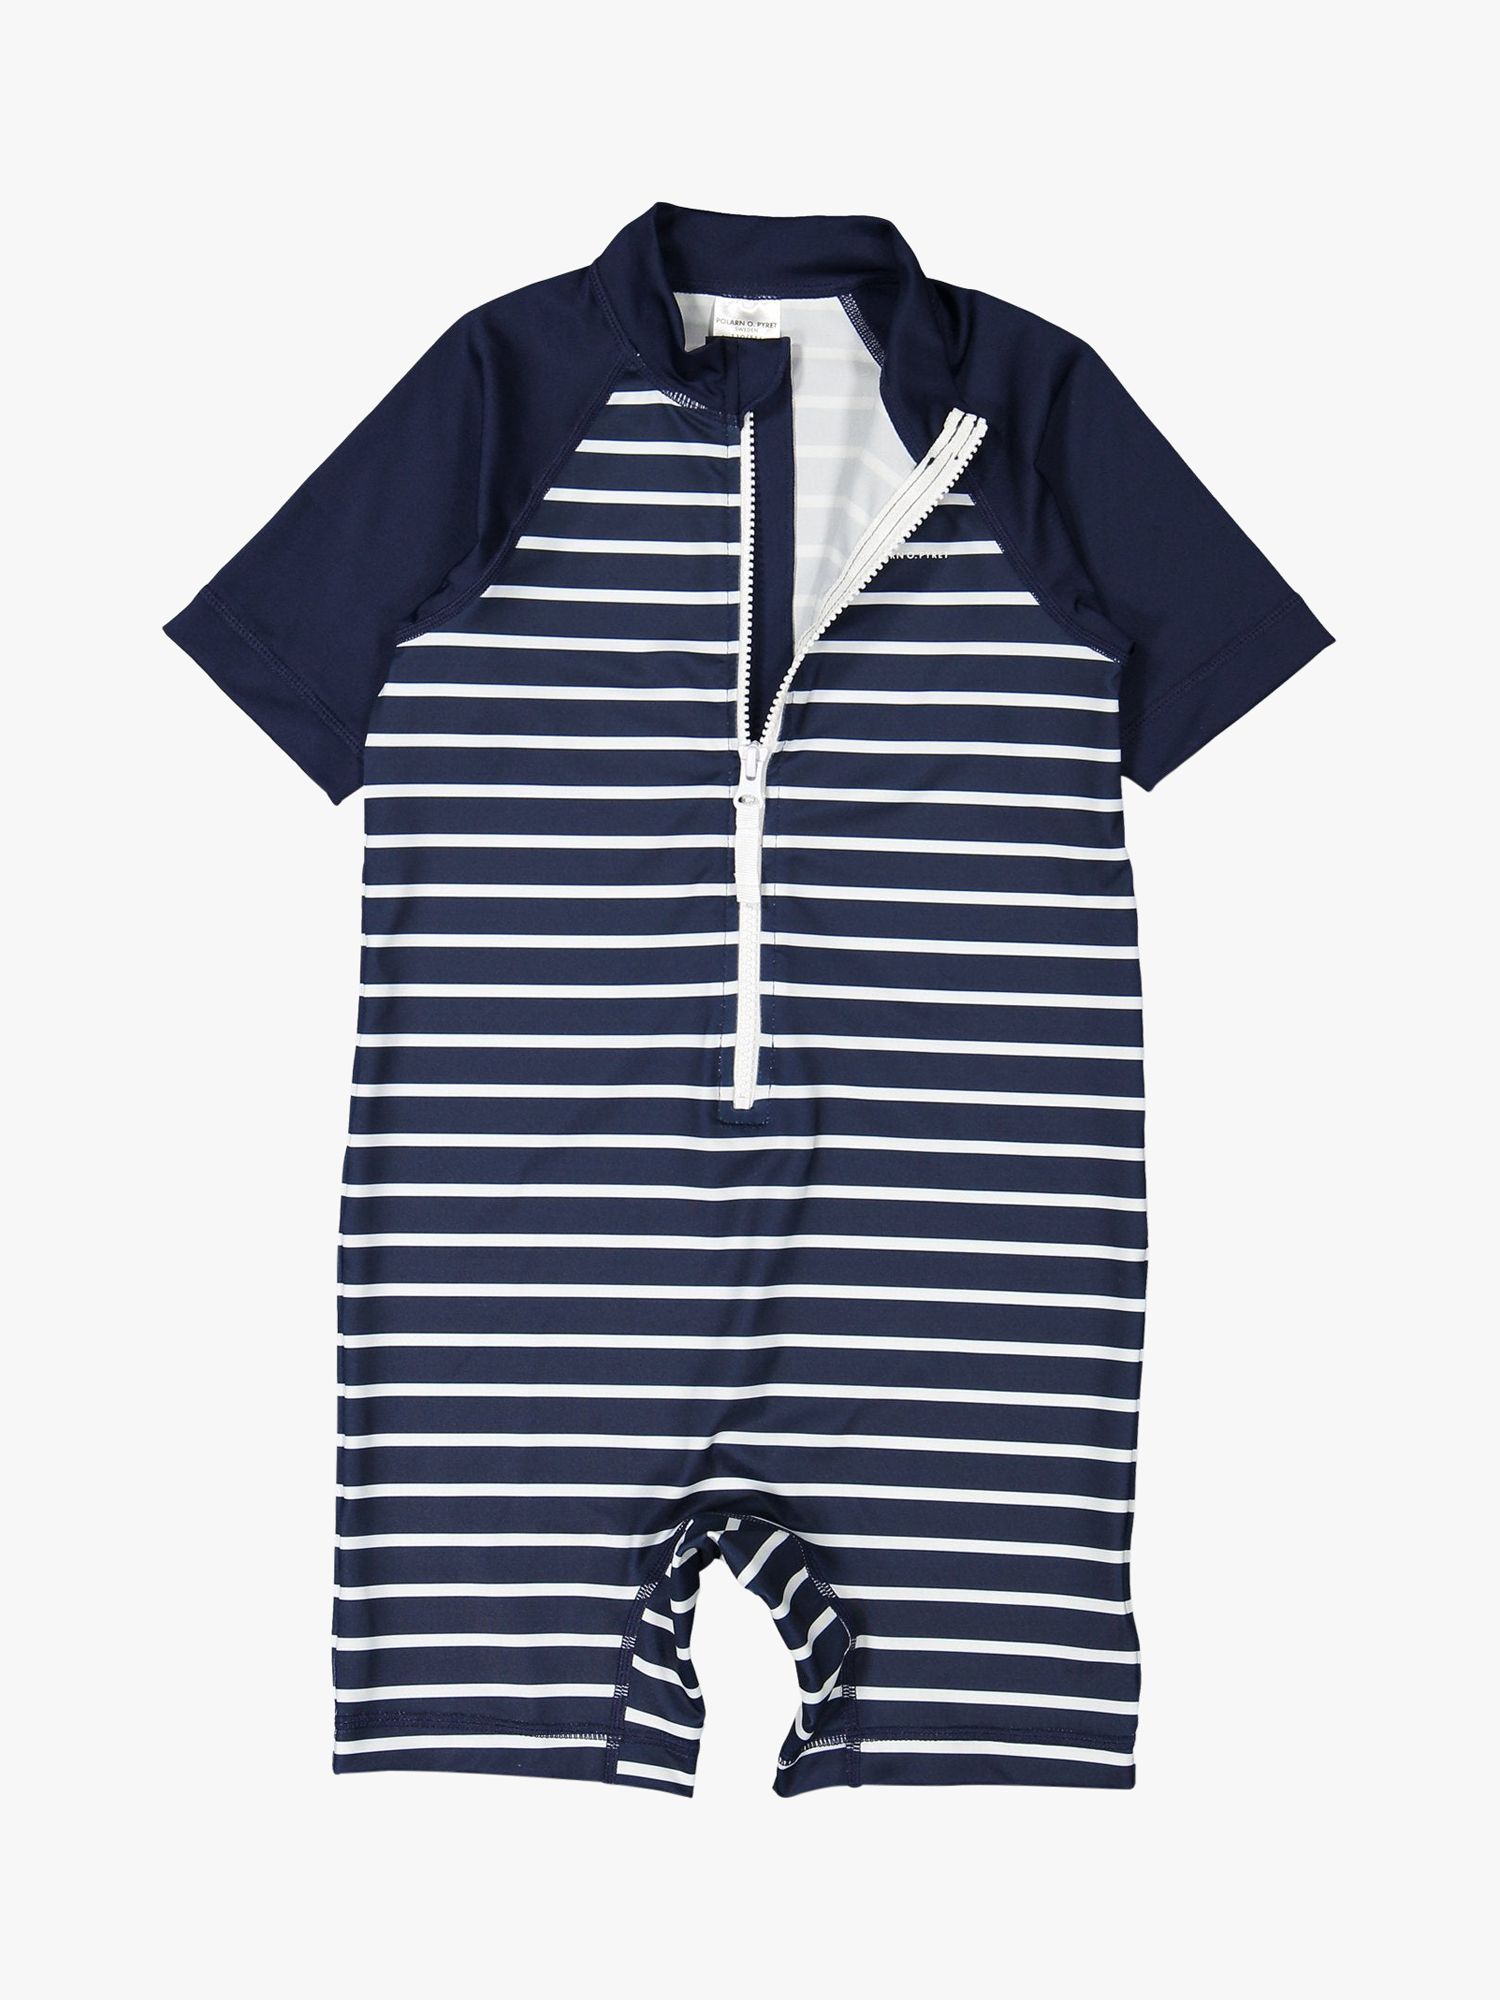 Polarn O. Pyret Kids' Stripe All-In-One Swimsuit, Navy, 6-12 months